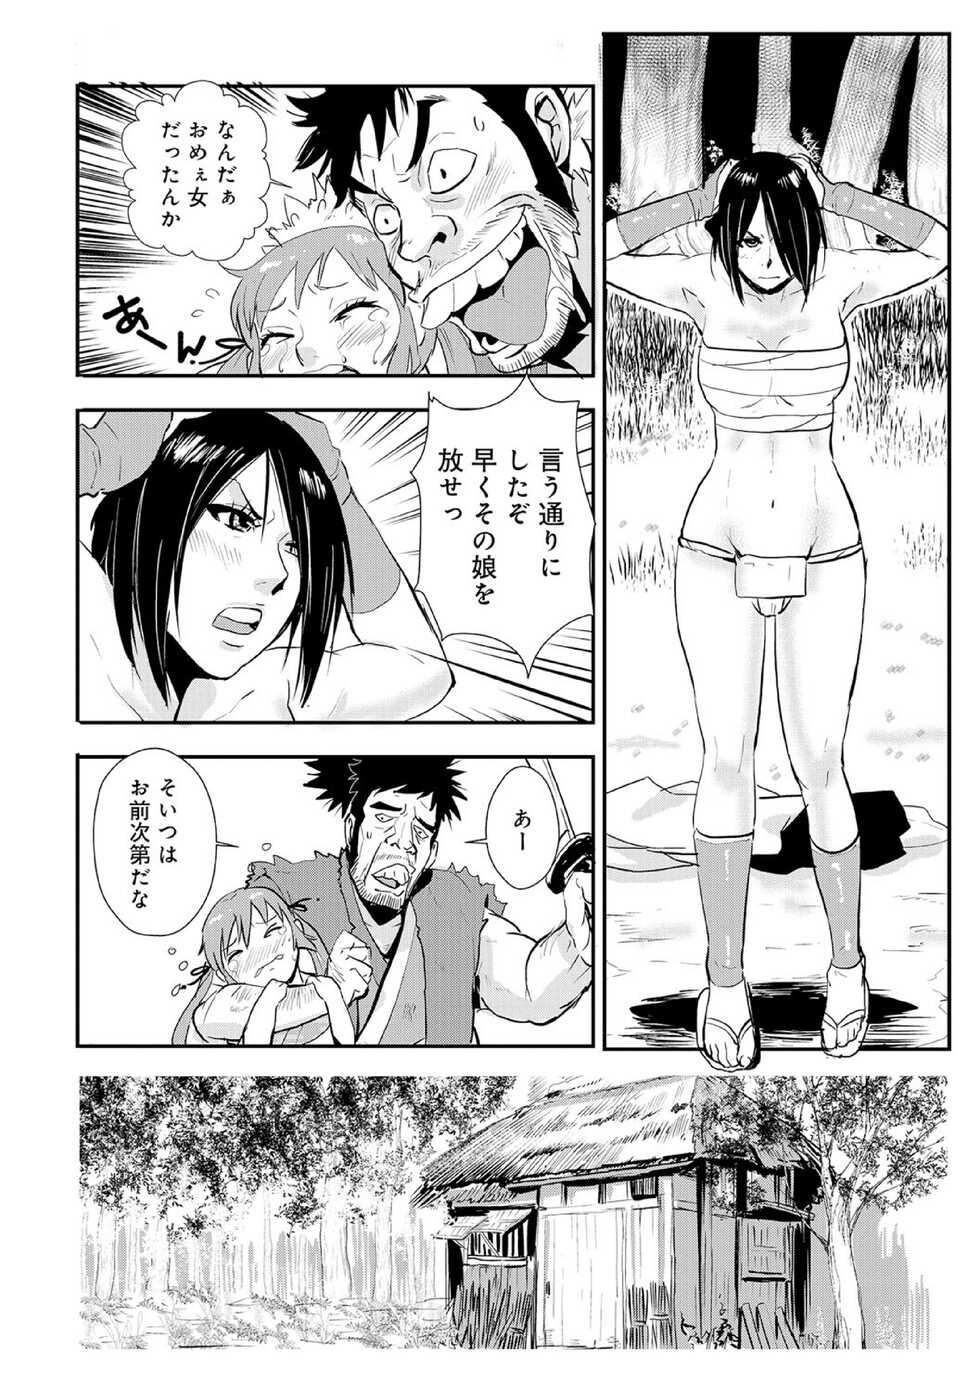 Impregnated Samurai 01: Maguwai Journey on a Woman's Road - Page 8